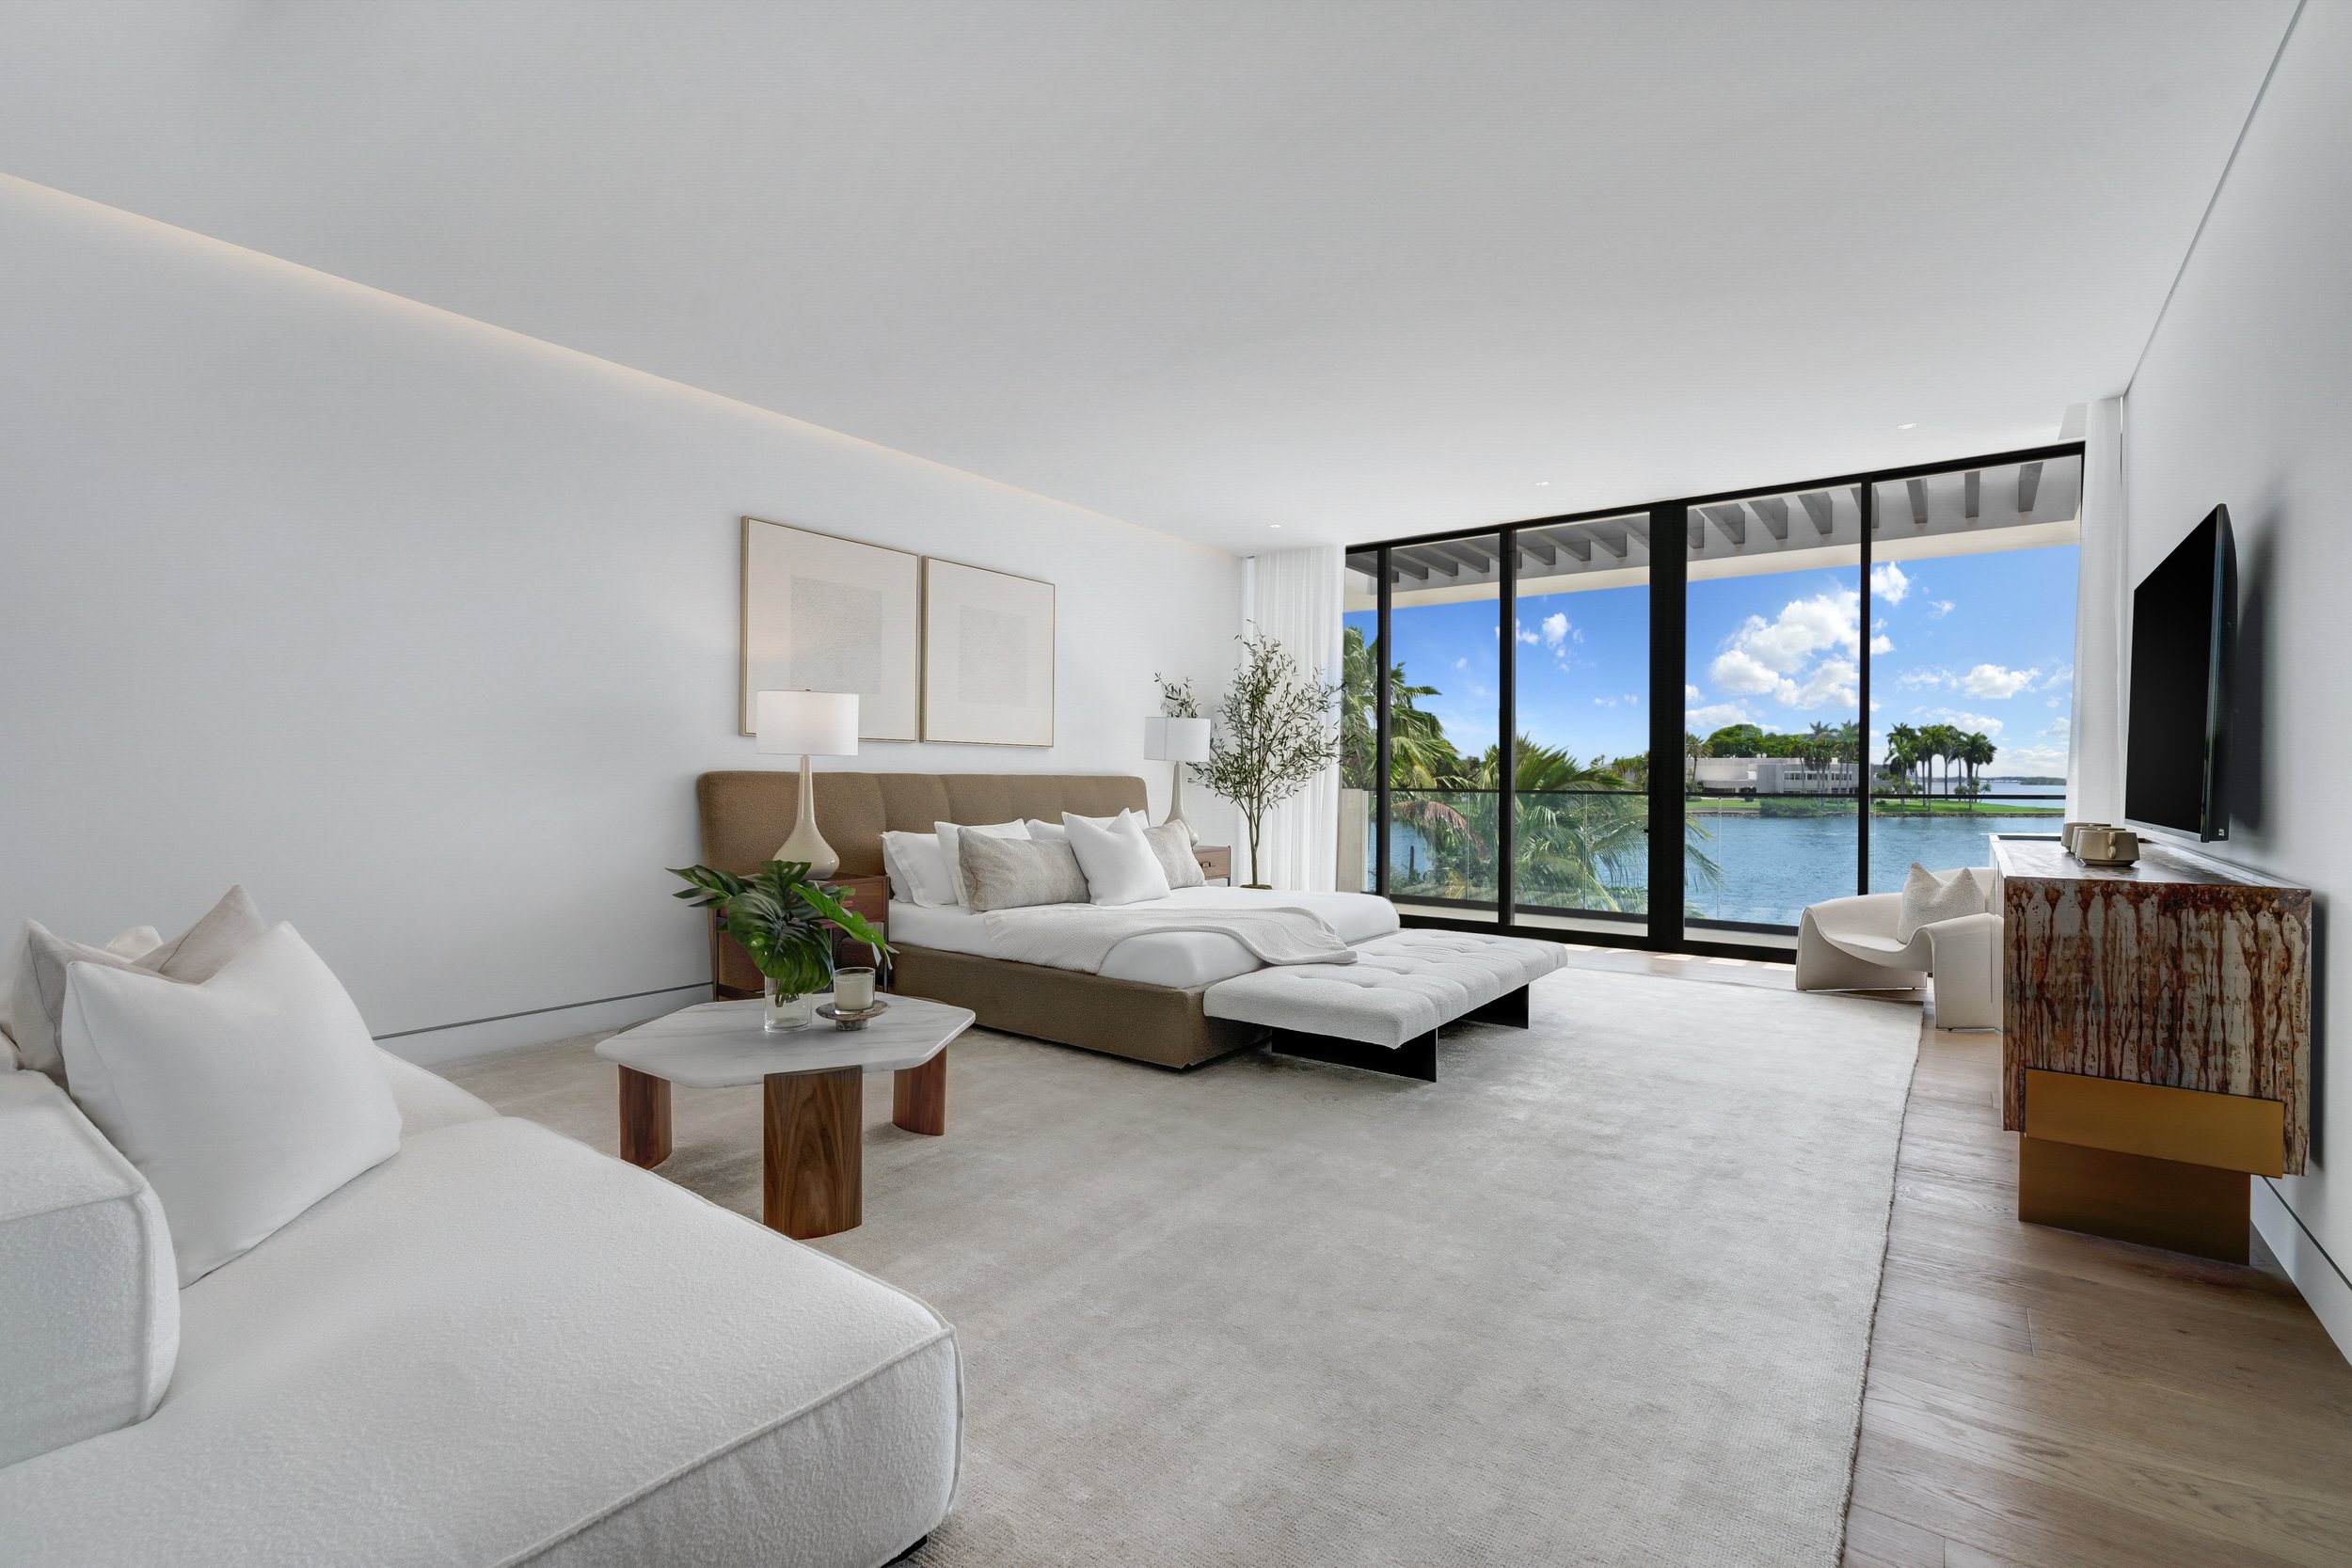 Check Out The Tropical Modern Waterfront On Bay Harbor Islands Asking $22.95 Million 9.jpg